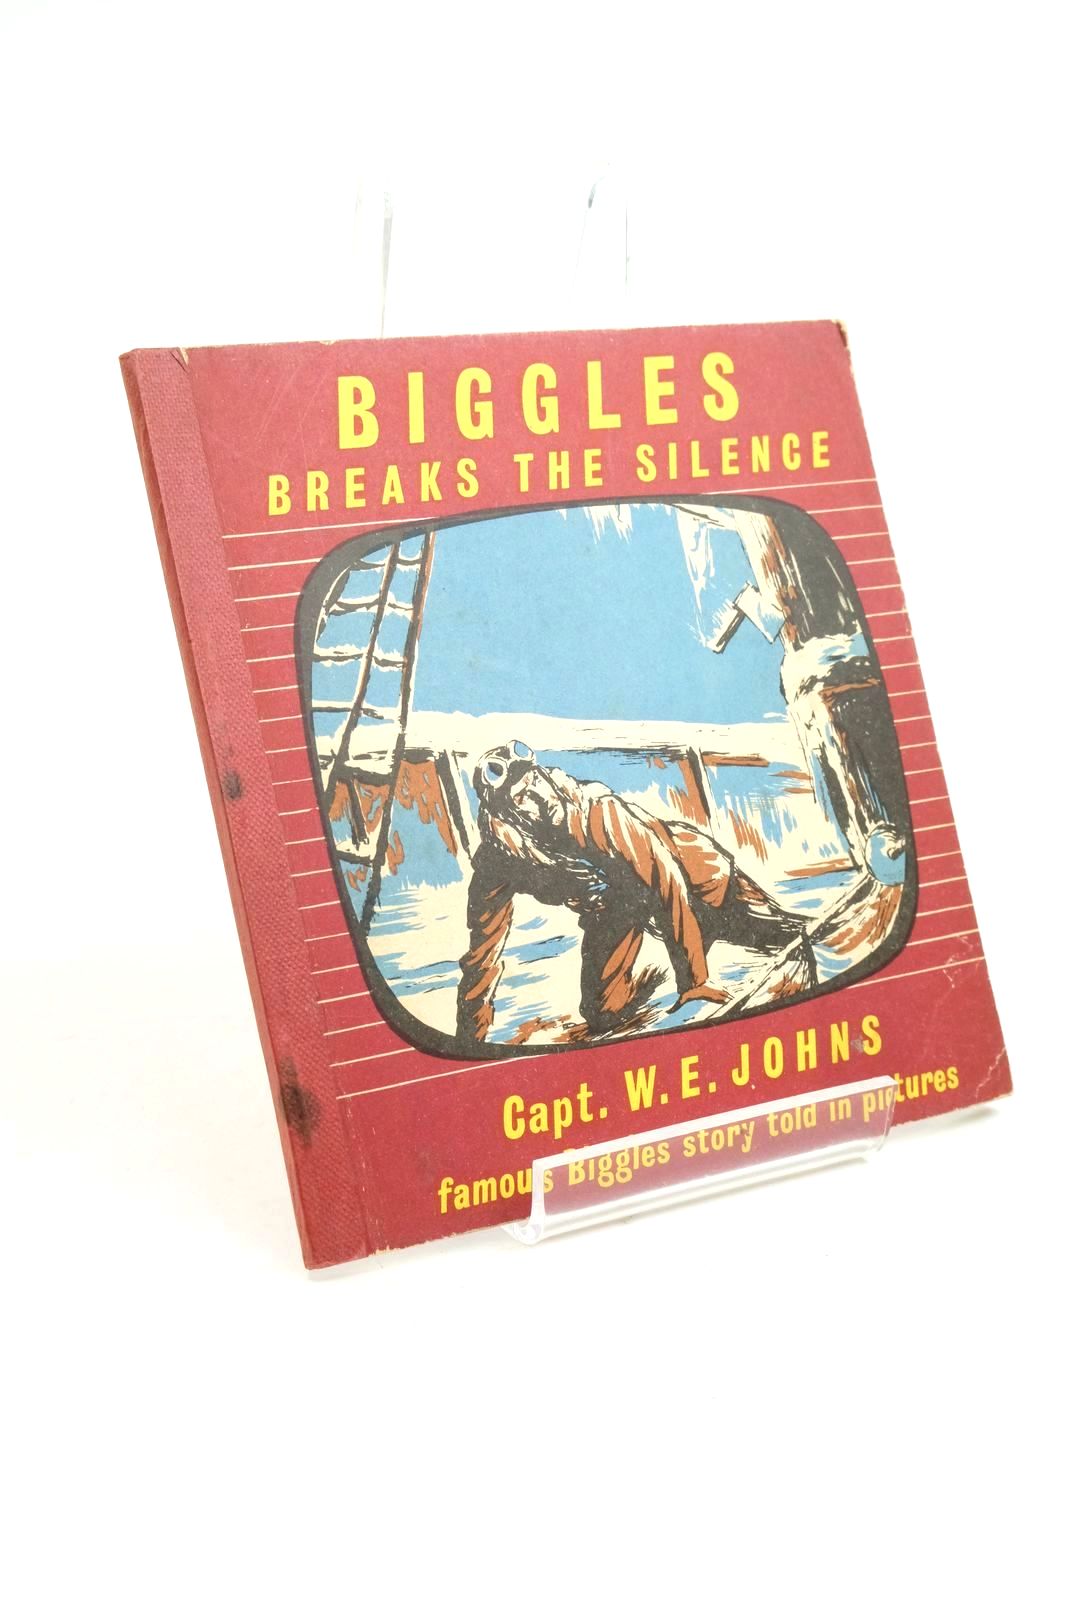 Photo of BIGGLES BREAKS THE SILENCE written by Johns, W.E. illustrated by Kay,  published by The Brockhampton Press Ltd. (STOCK CODE: 1322202)  for sale by Stella & Rose's Books